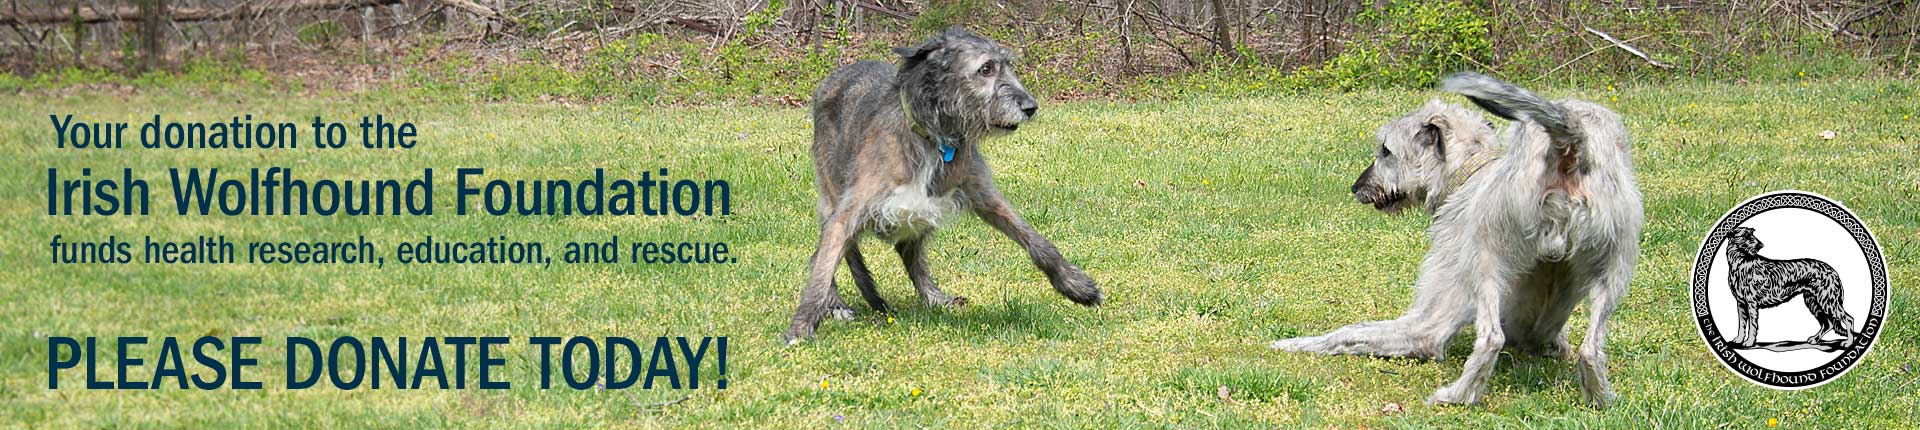 Your donation to the Irish Wolfhound Foundation 
                funds health research, education, and rescue. Please donate today!